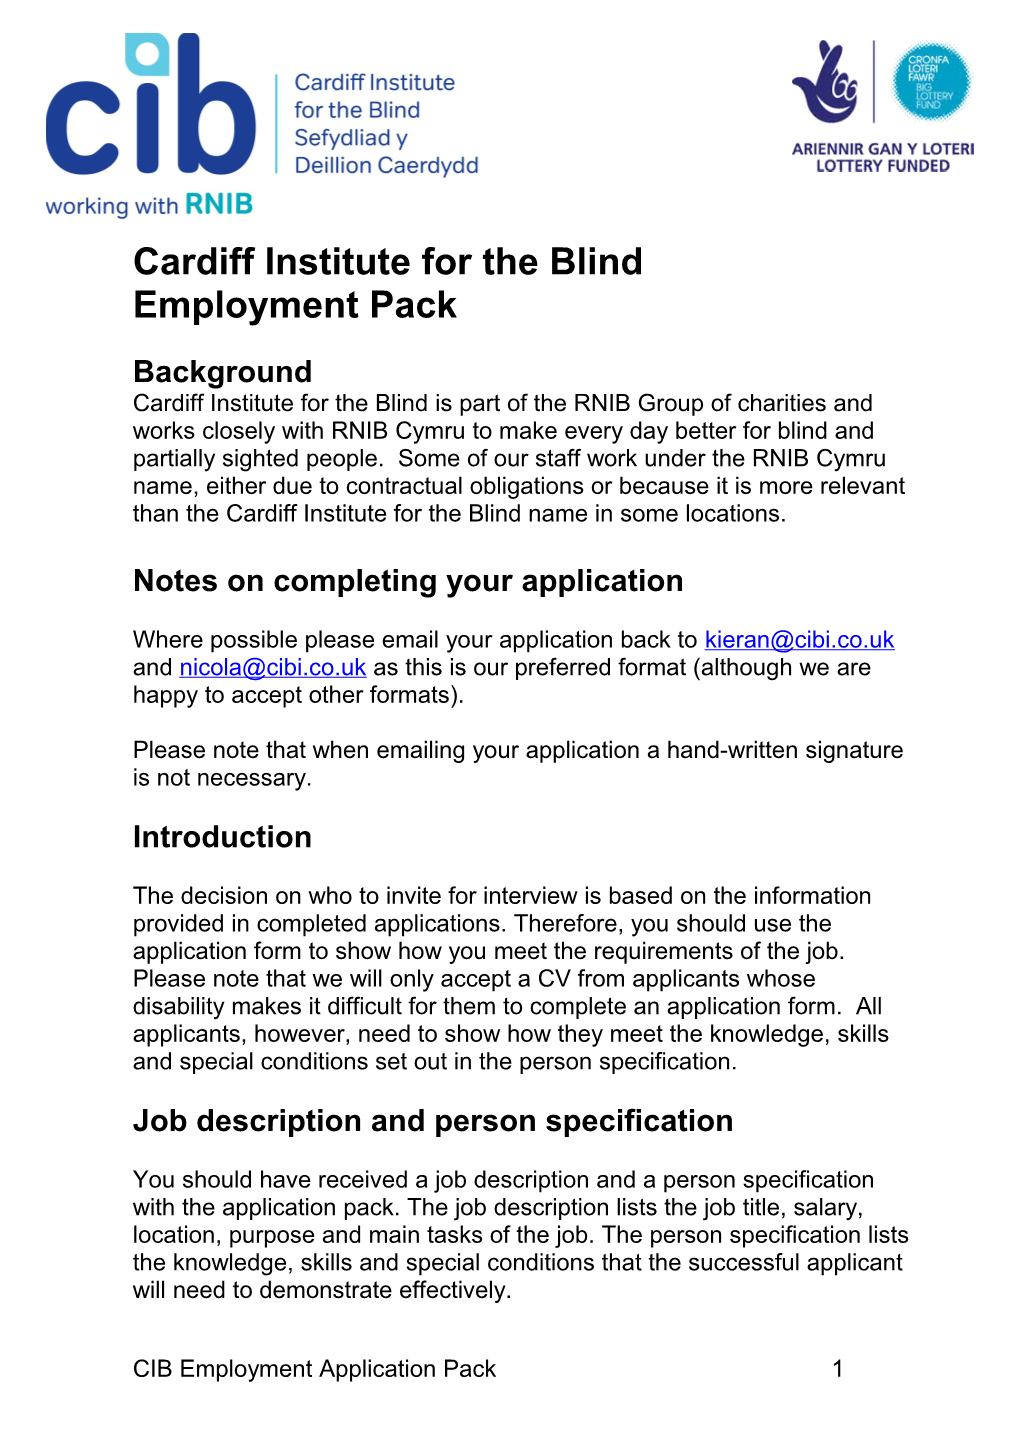 Cardiff Institute for the Blind